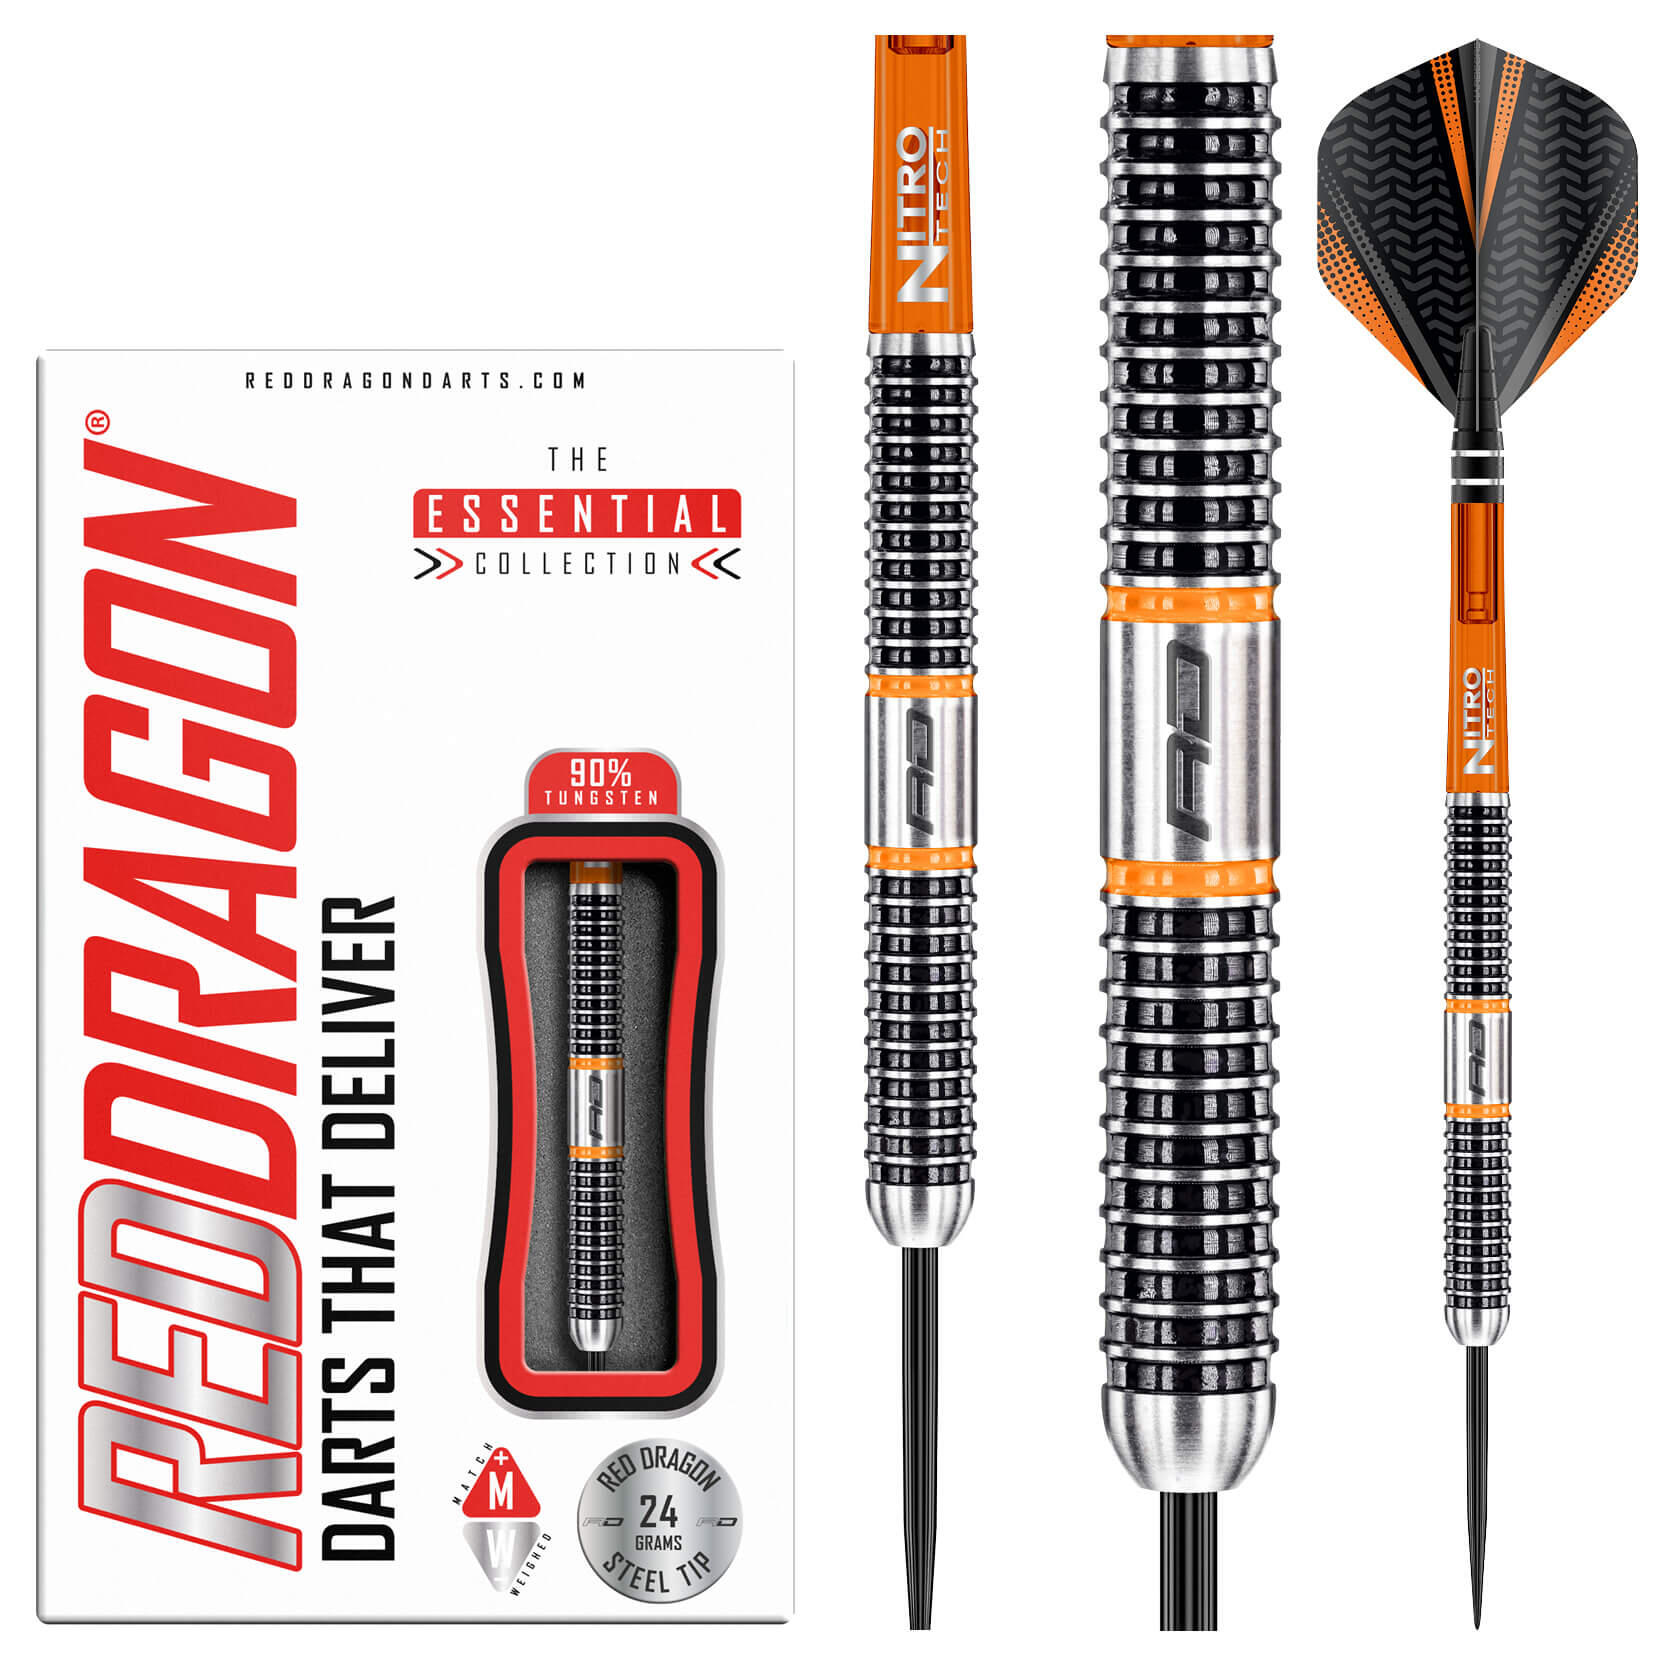 RED DRAGON DARTS Amberjack 18: 22g Tungsten Darts Set with Flights and Stems